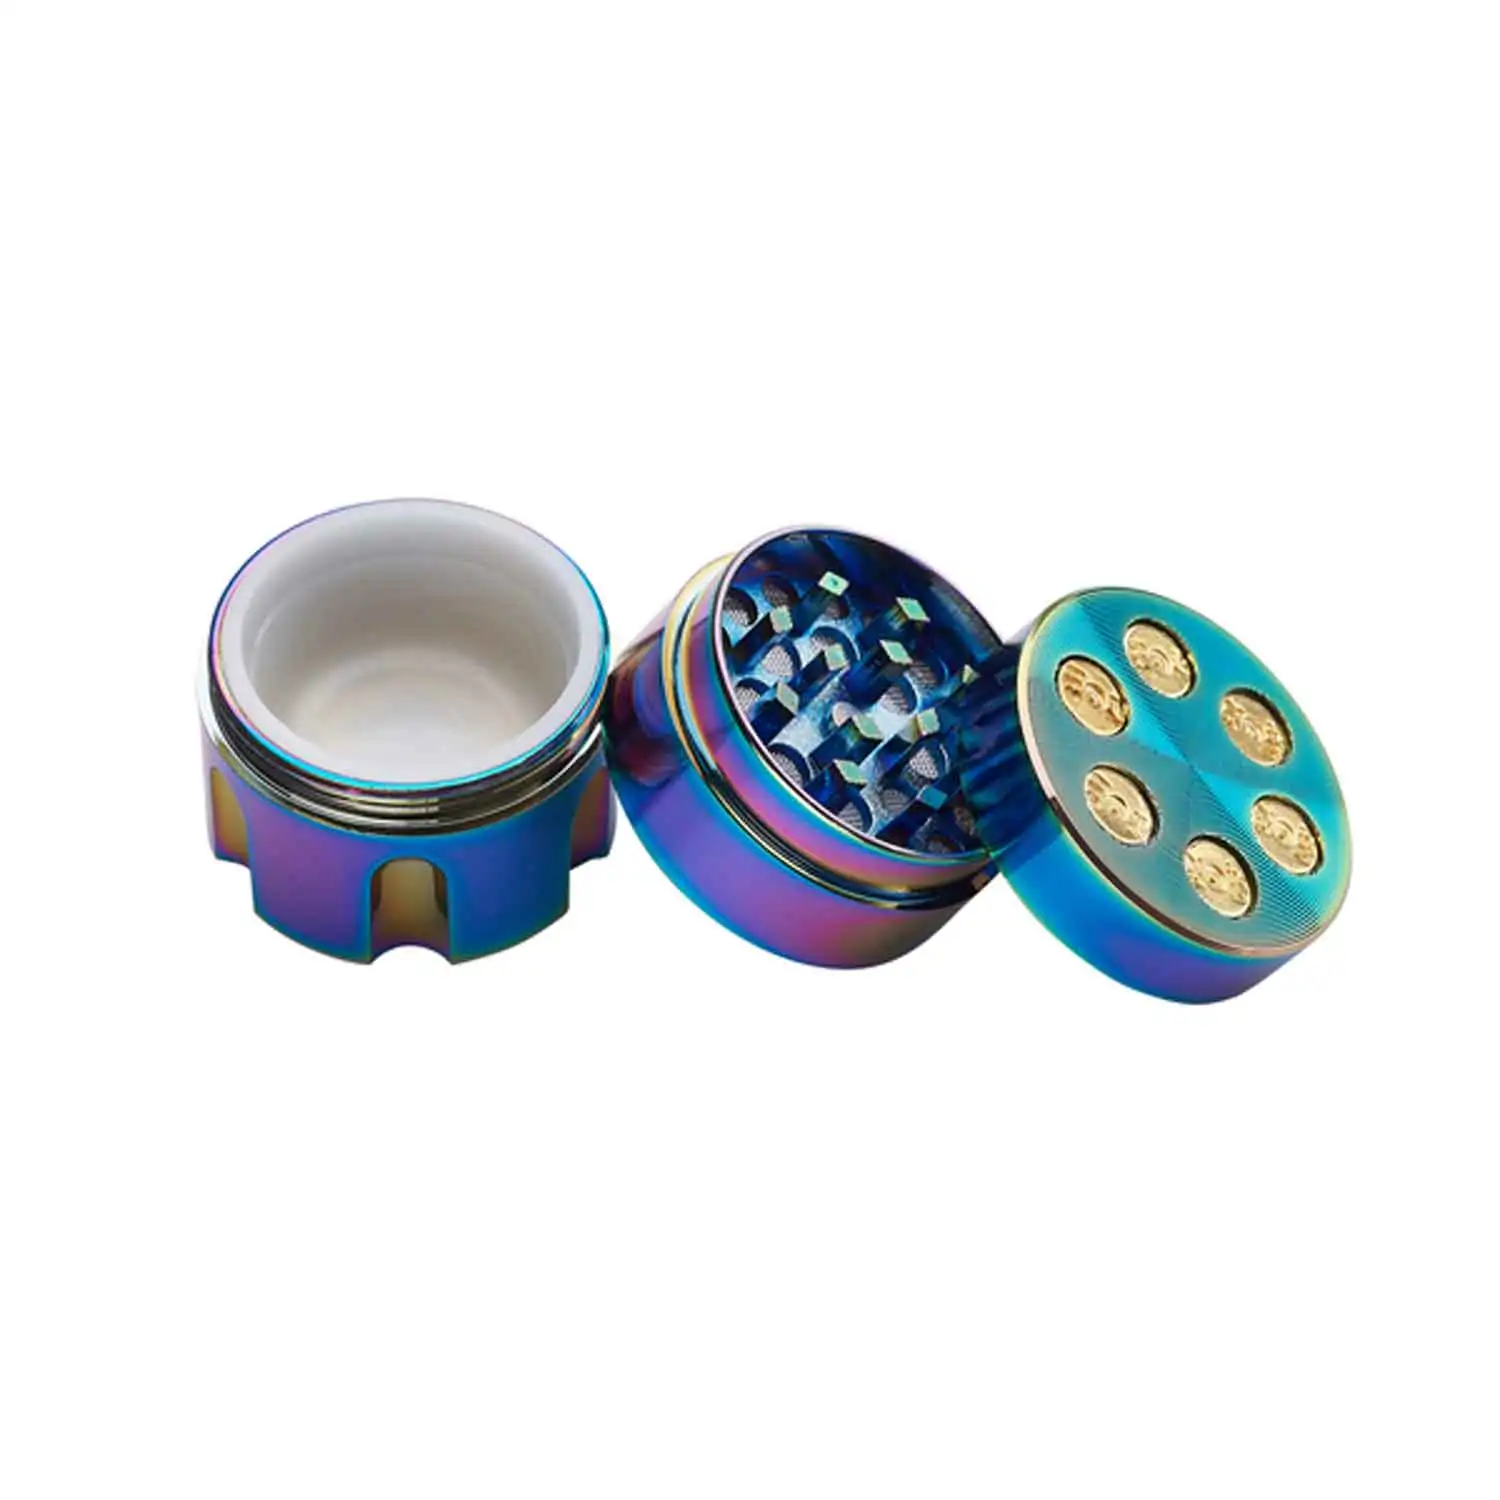 Champ High grinder mini balle 3 parts - Buy at Real Tobacco